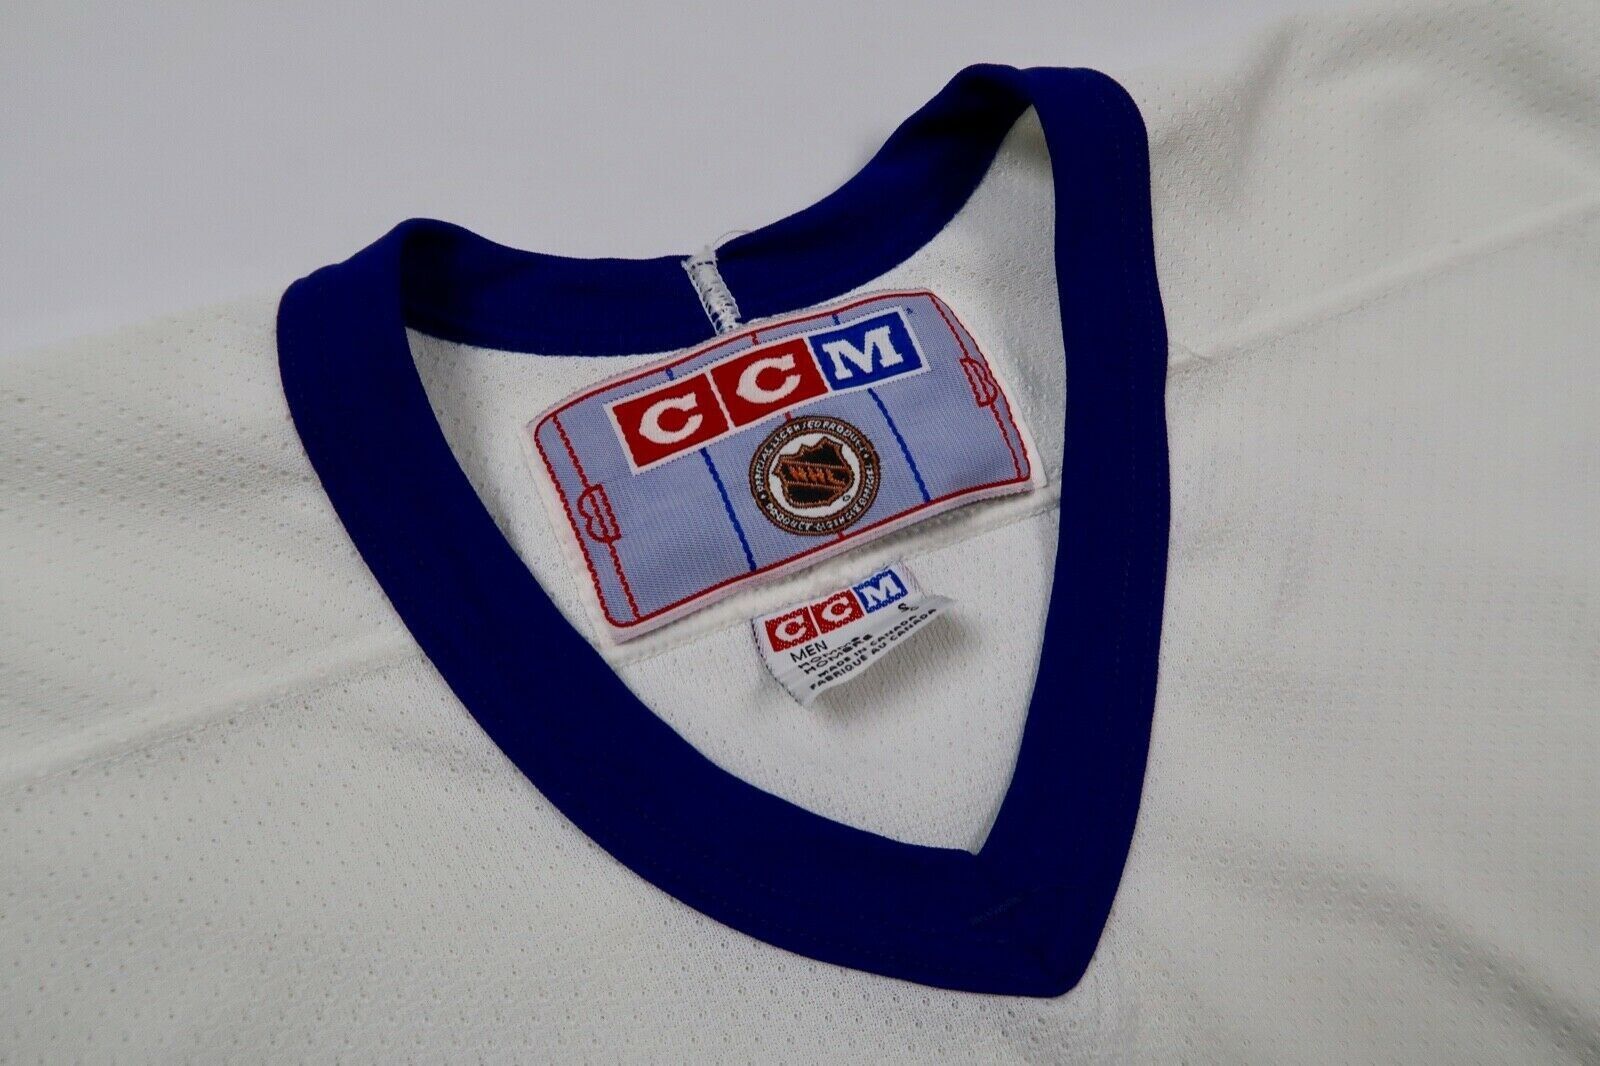 Ccm VTG 1998 NHL All Star Game CCM Hockey Jersey Authentic Rare 90s Size US S / EU 44-46 / 1 - 2 Preview